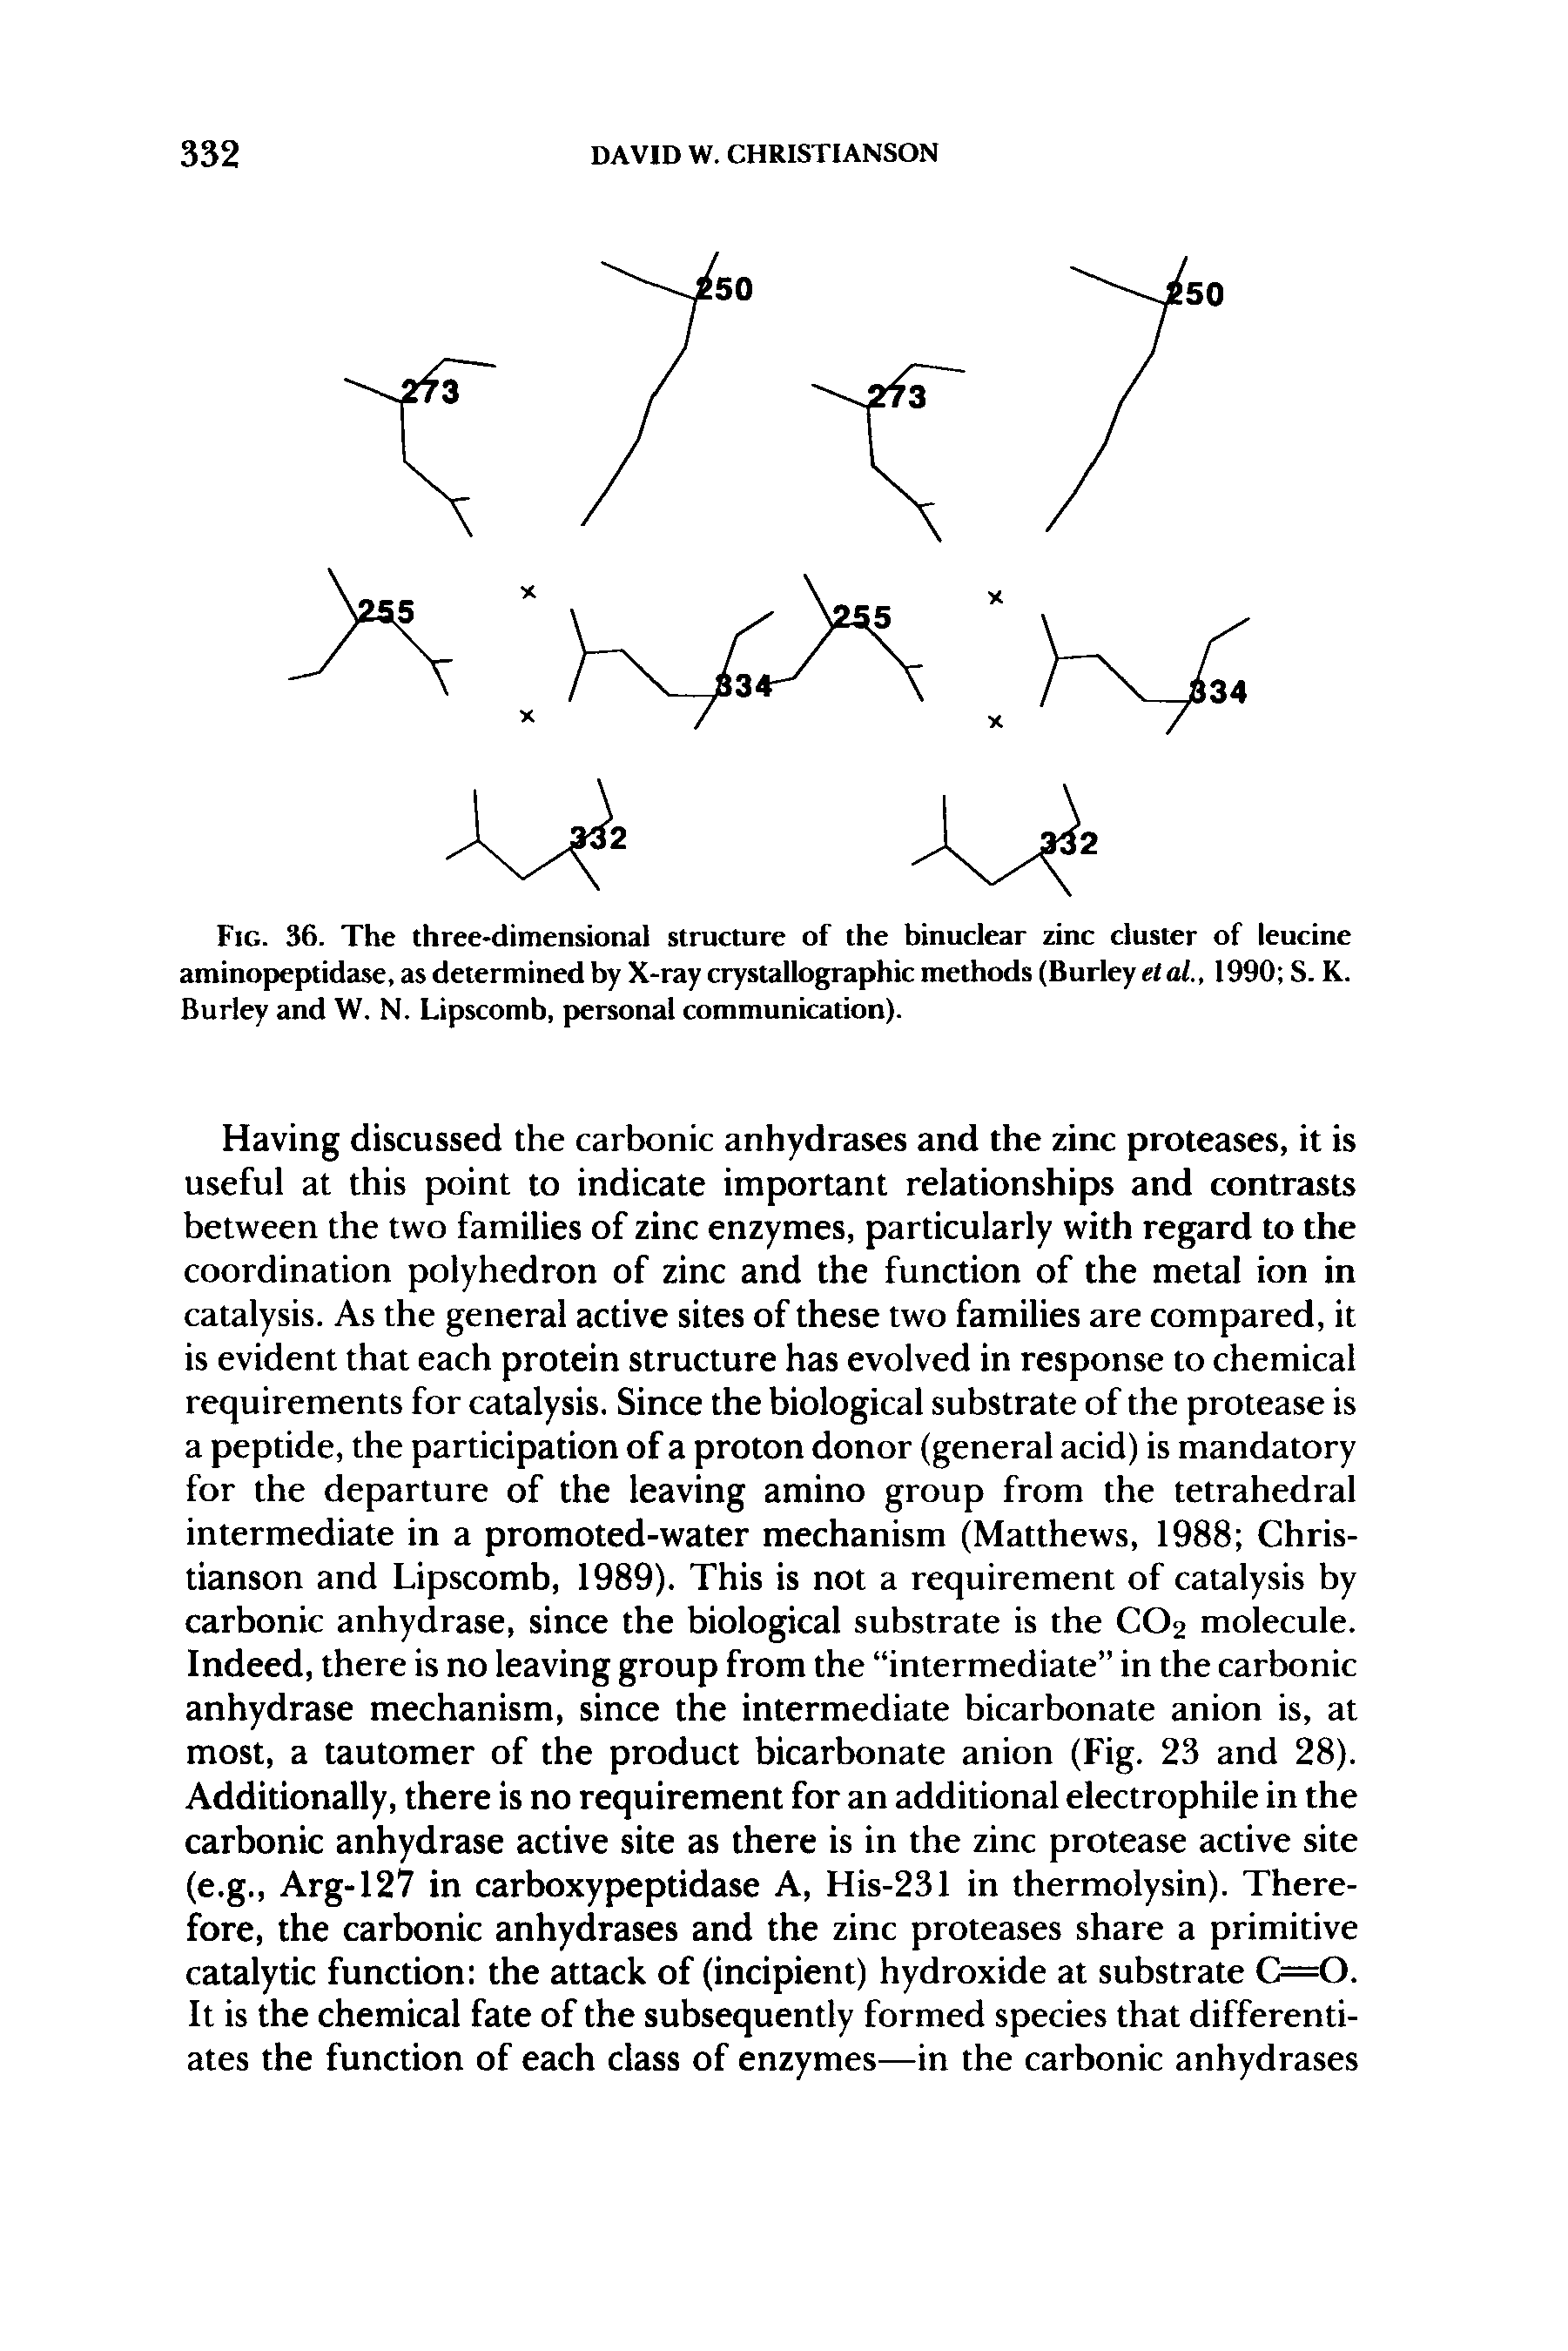 Fig. 36. The three-dimensional structure of the binuclear zinc cluster of leucine aminopeptidase, as determined by X-ray crystallographic methods (Burley etai, 1990 S. K. Burley and W. N. Lipscomb, personal communication).